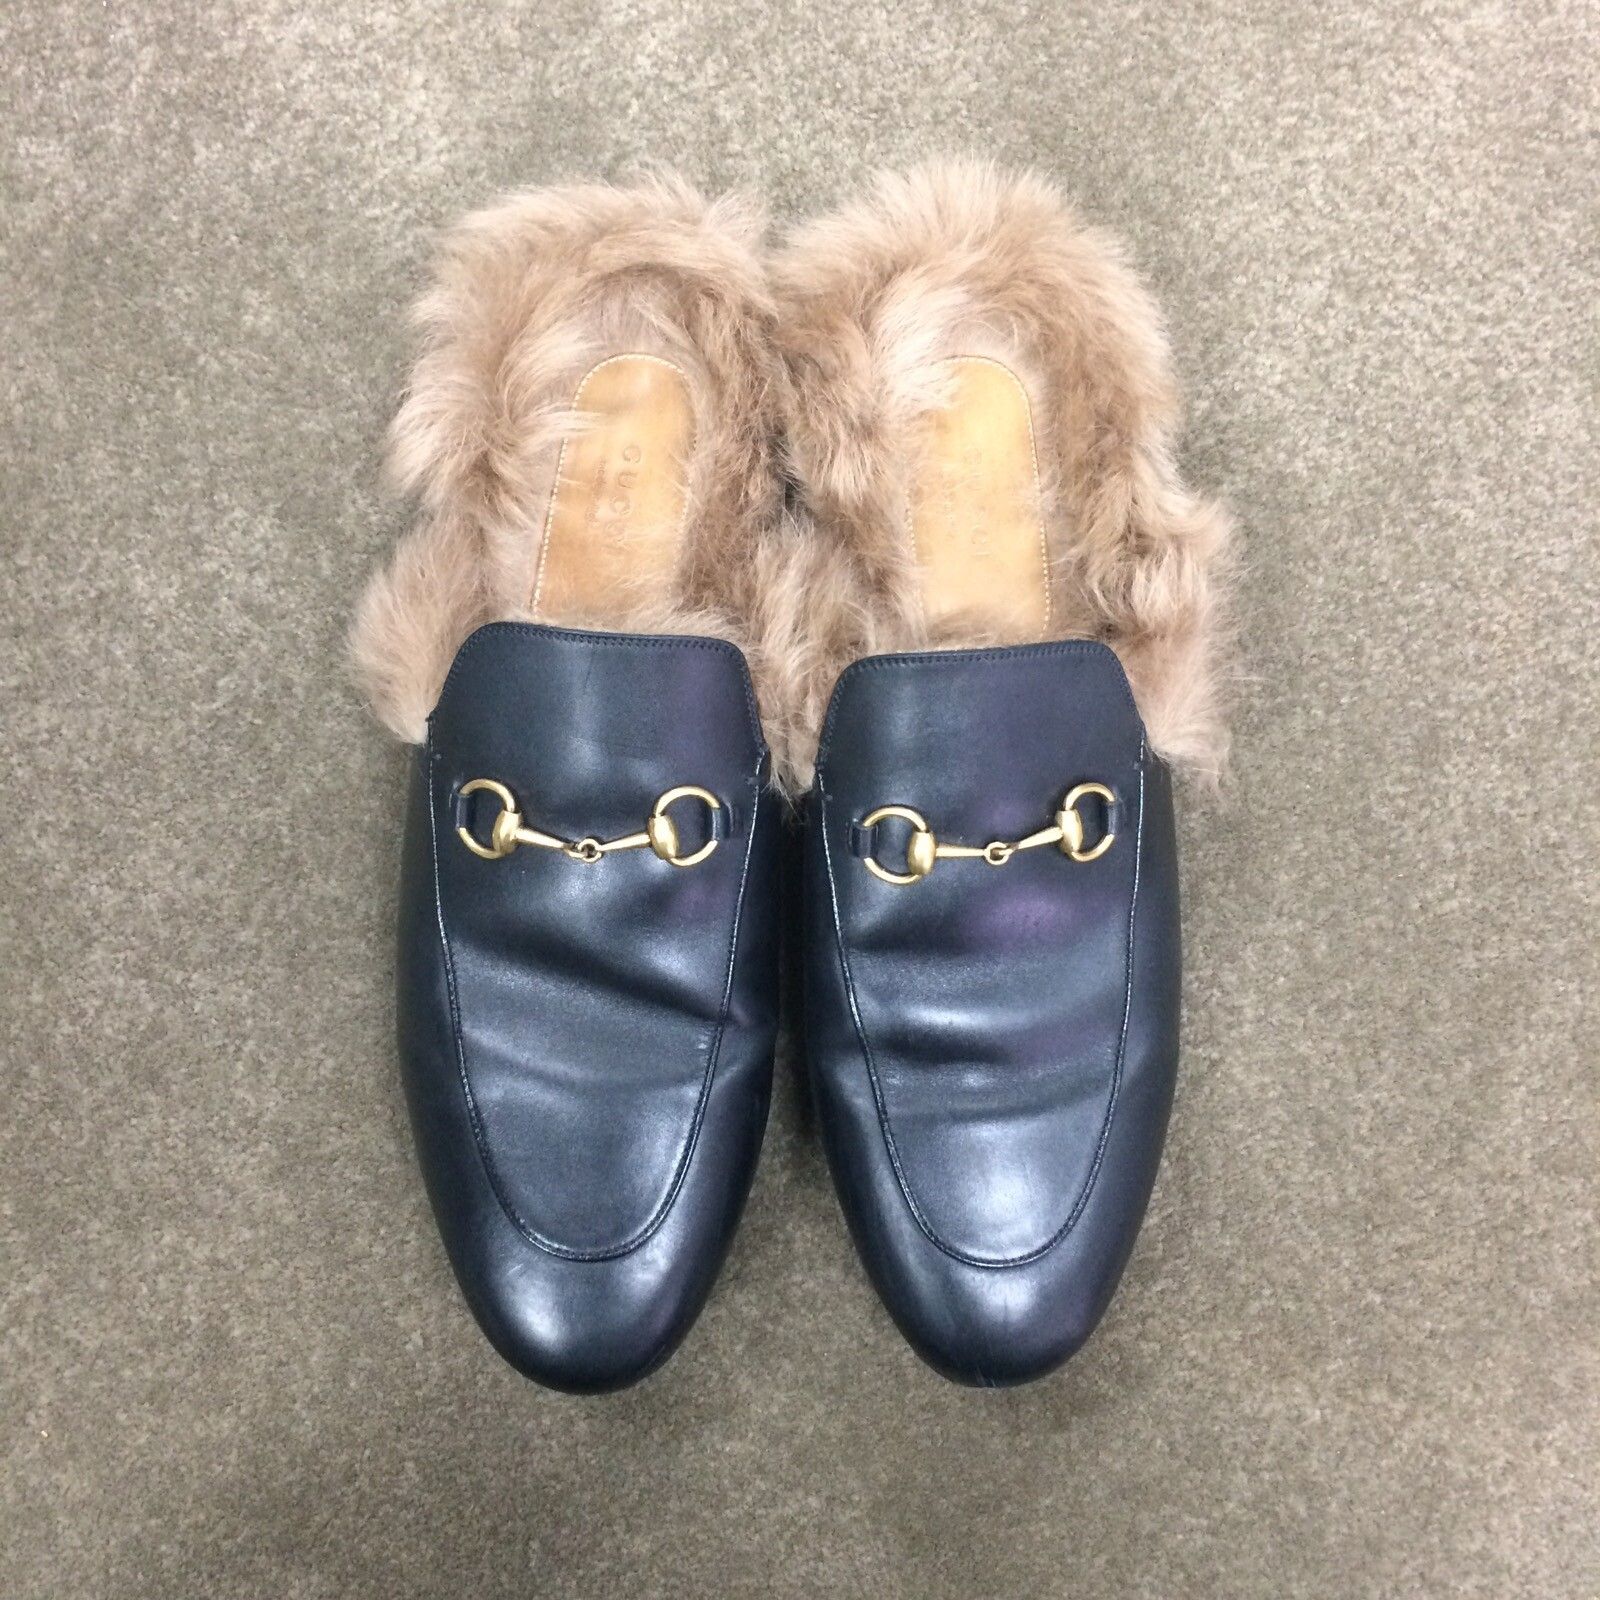 Gucci Princetown Loafer | Grailed